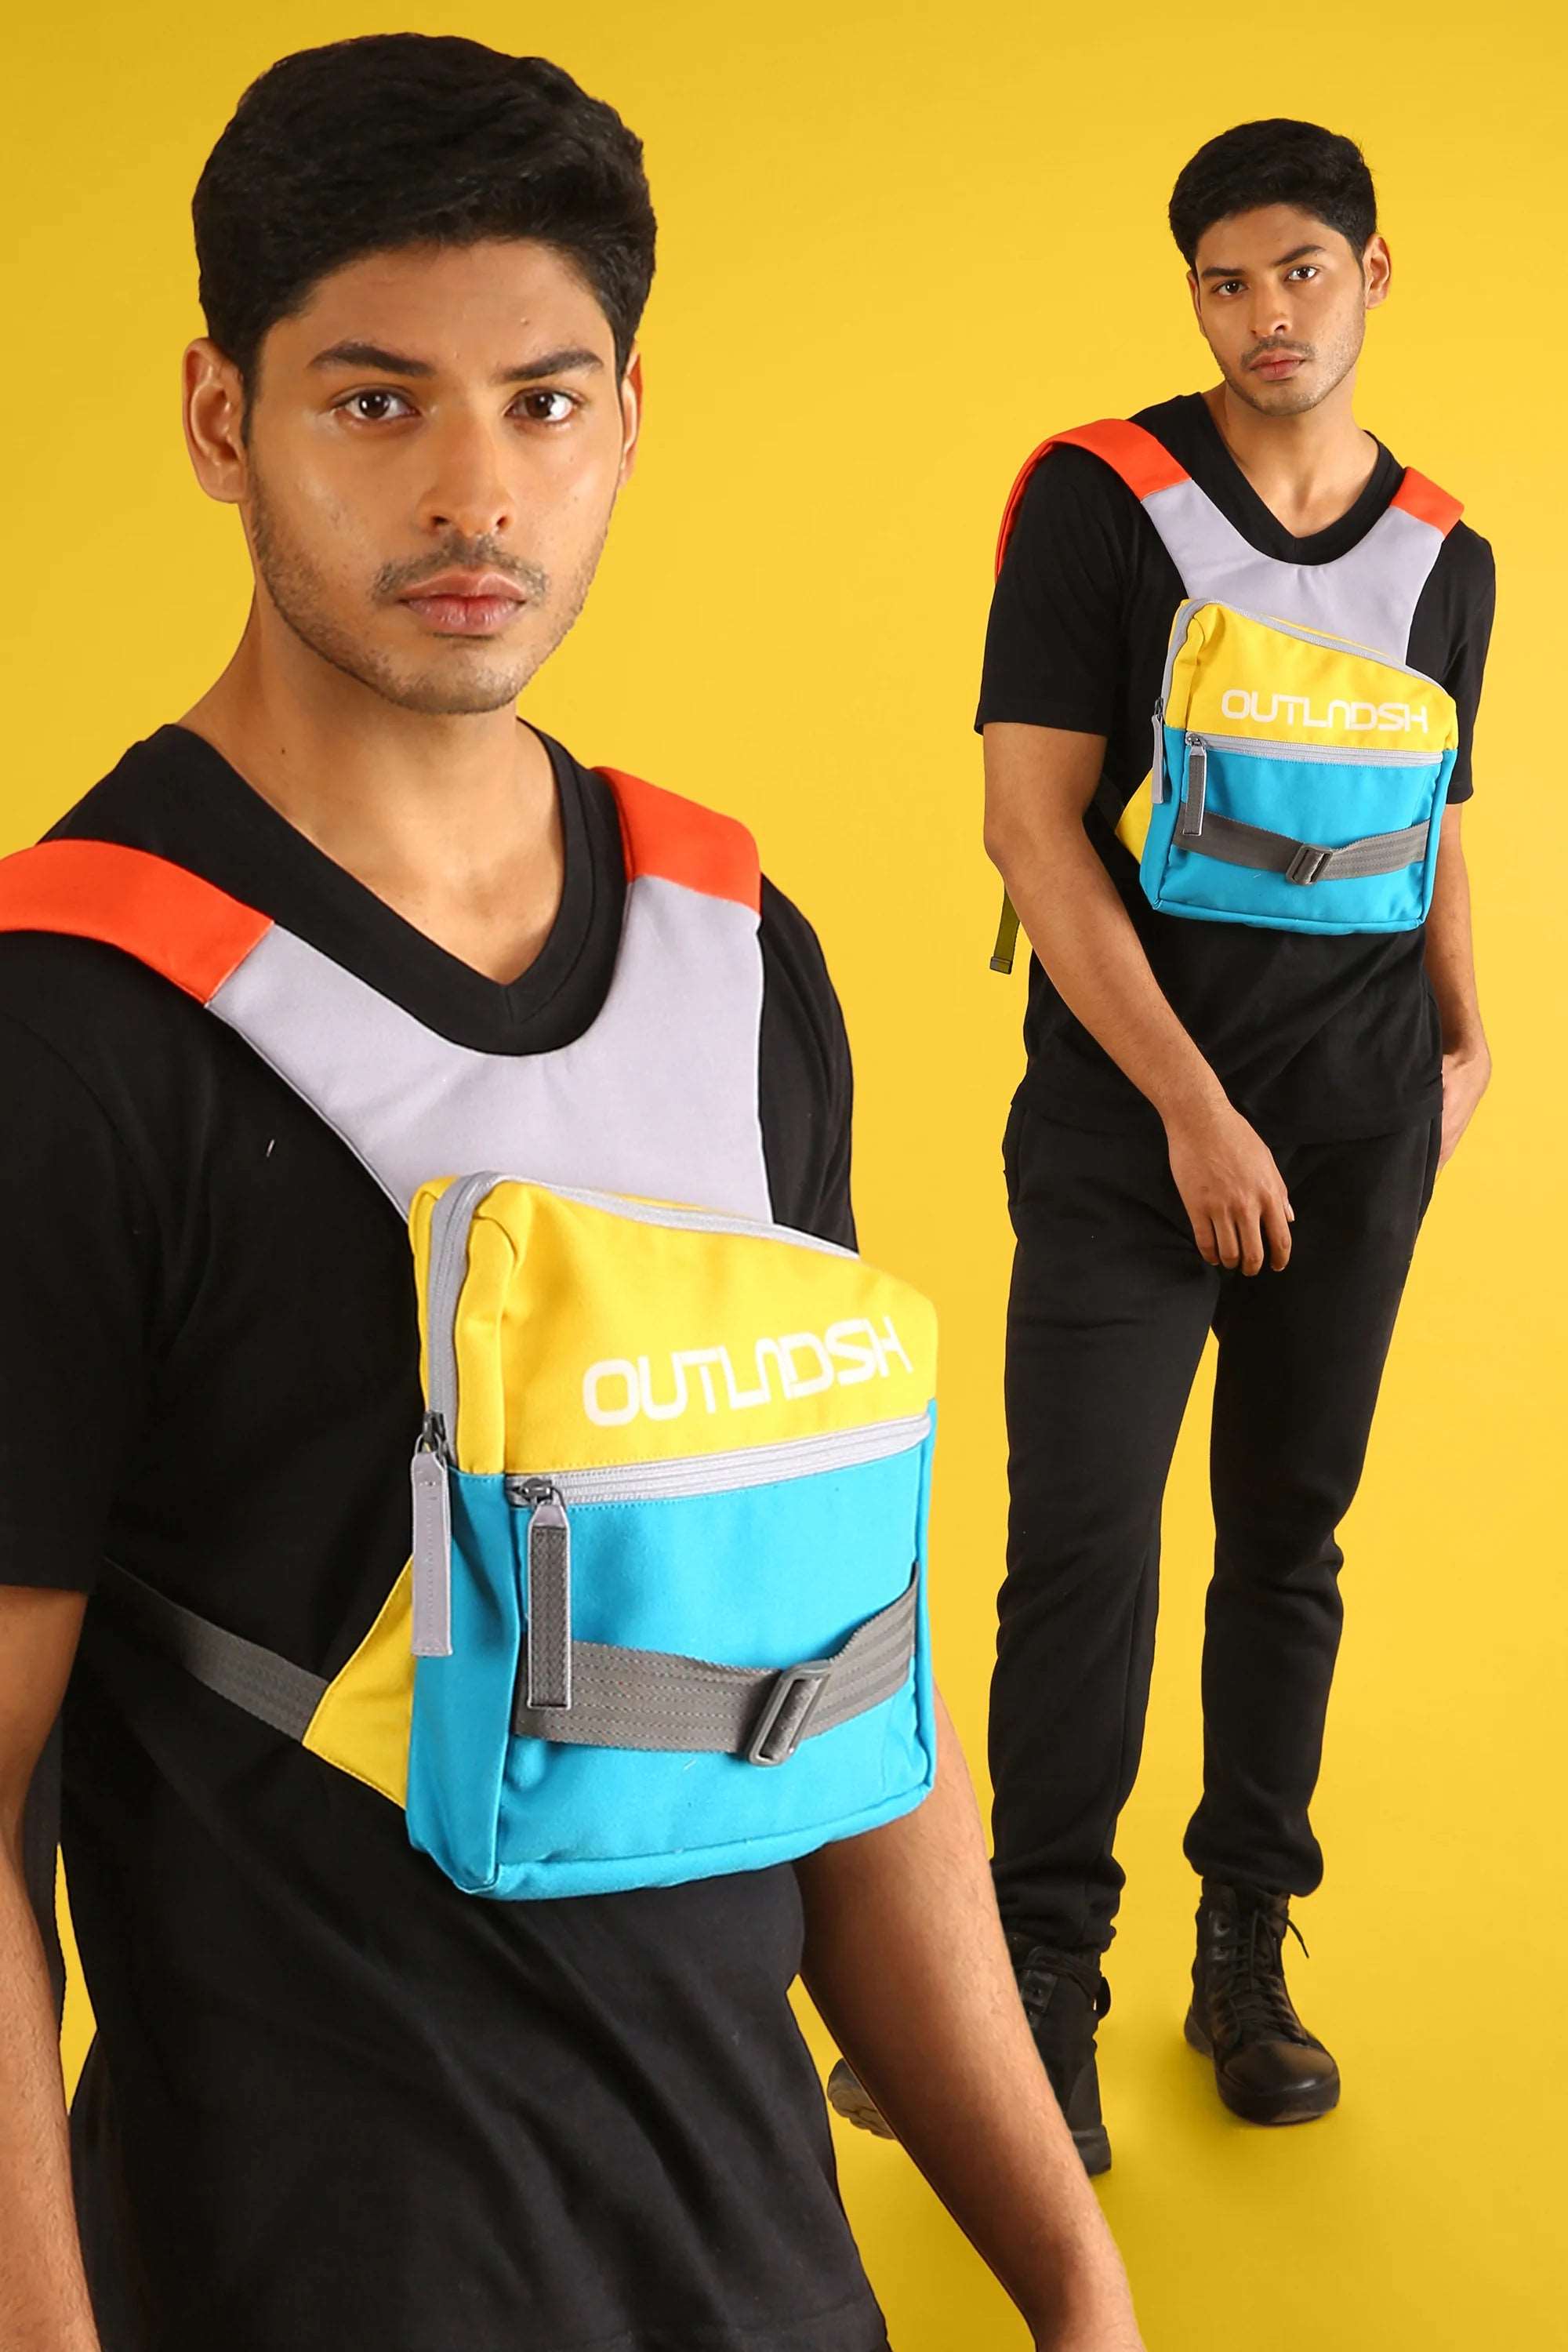 OUTLNDSH Mini Backpack bag plus chest bag yellow color 